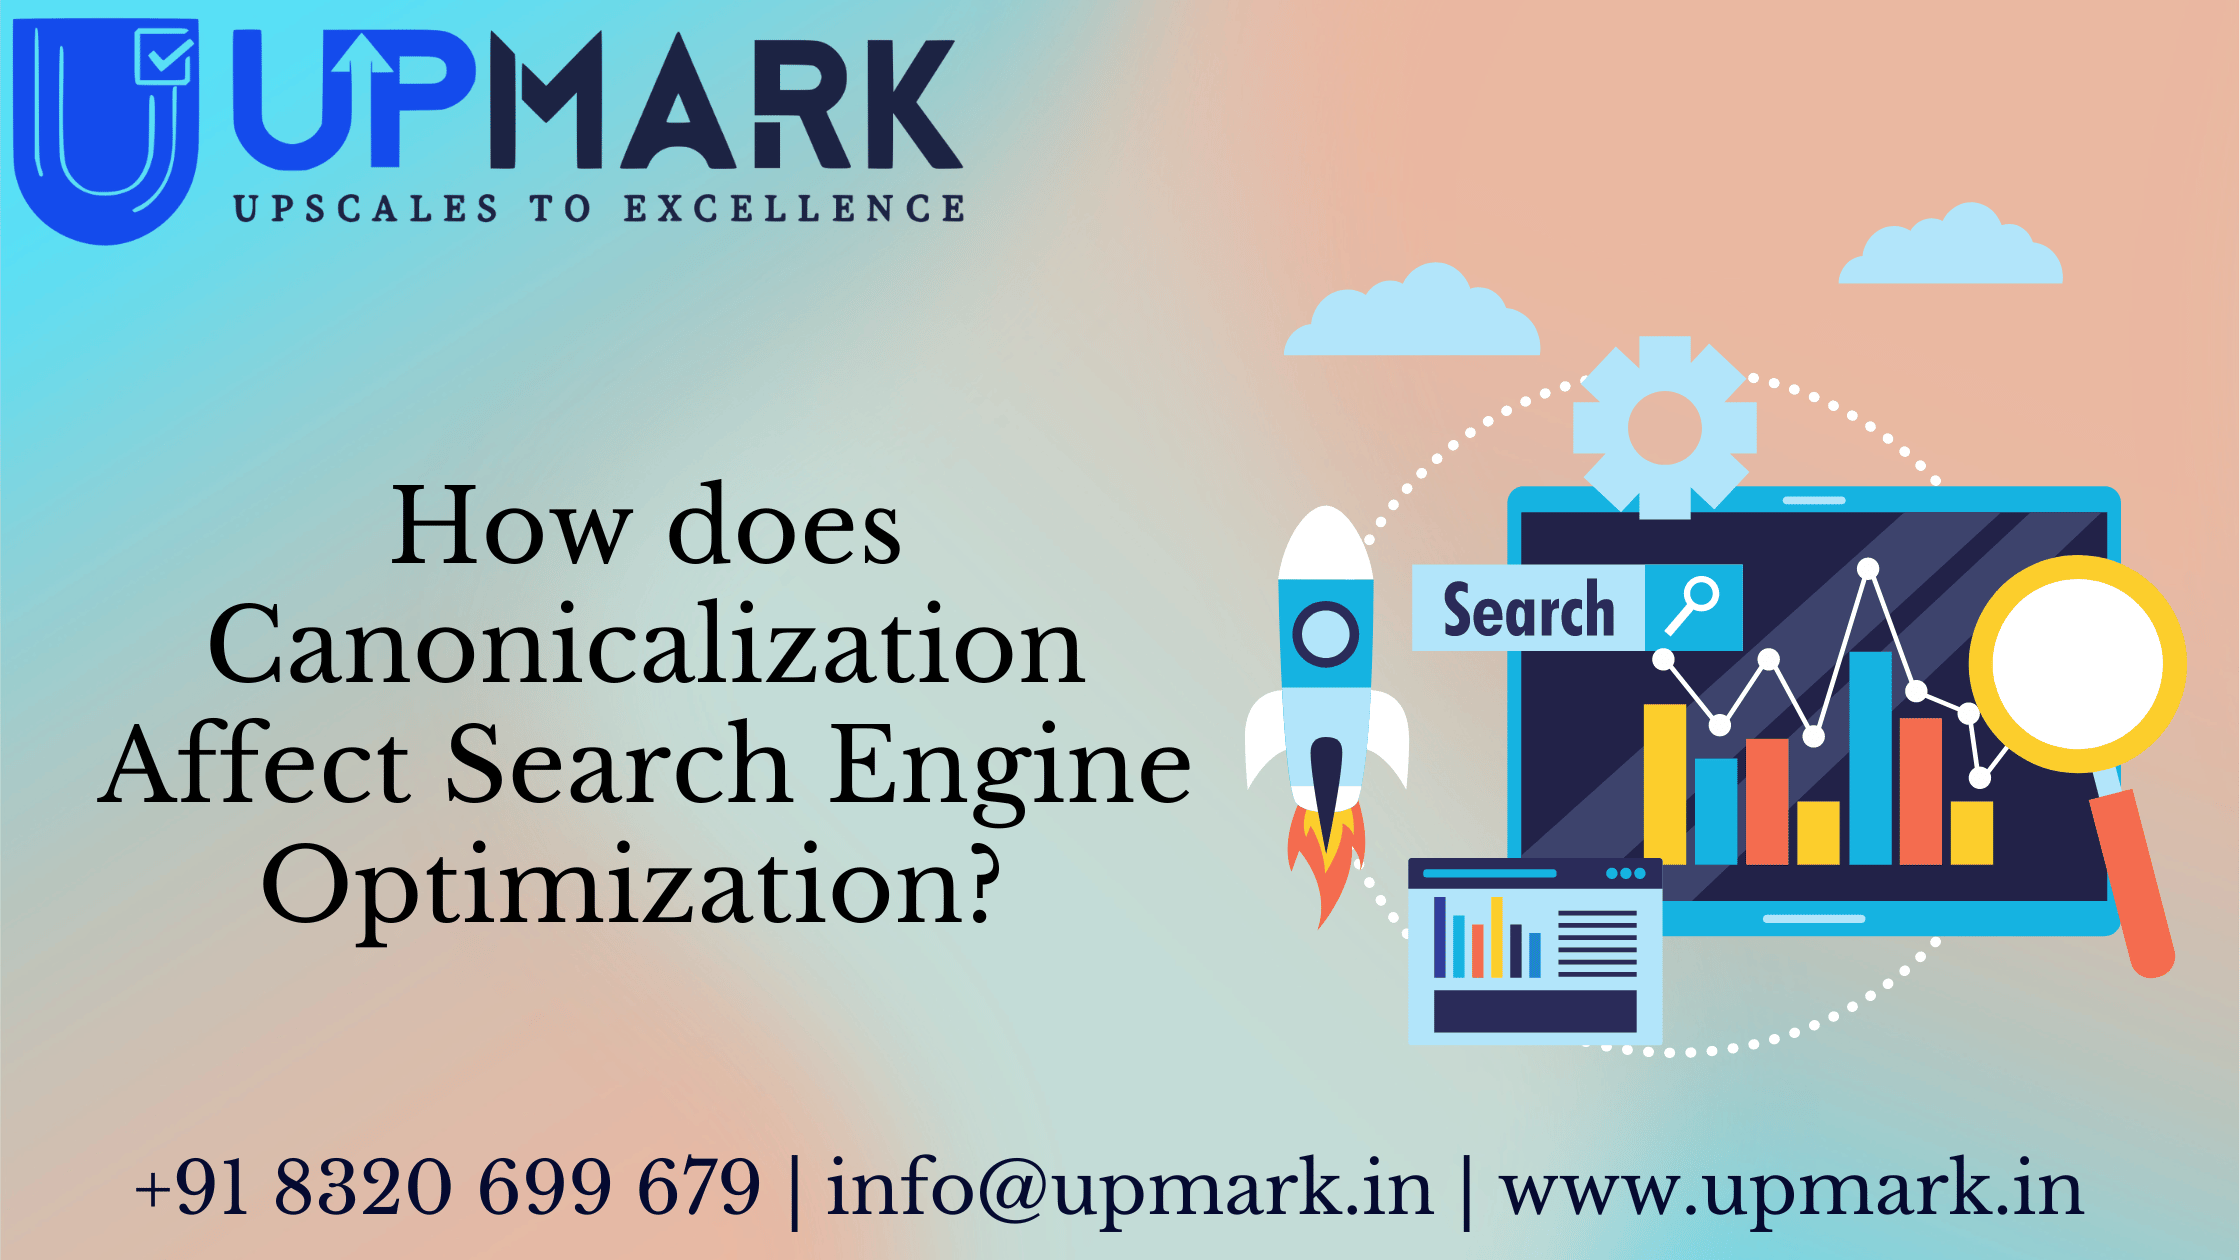 How does Canonicalization Affect Search Engine Optimization?